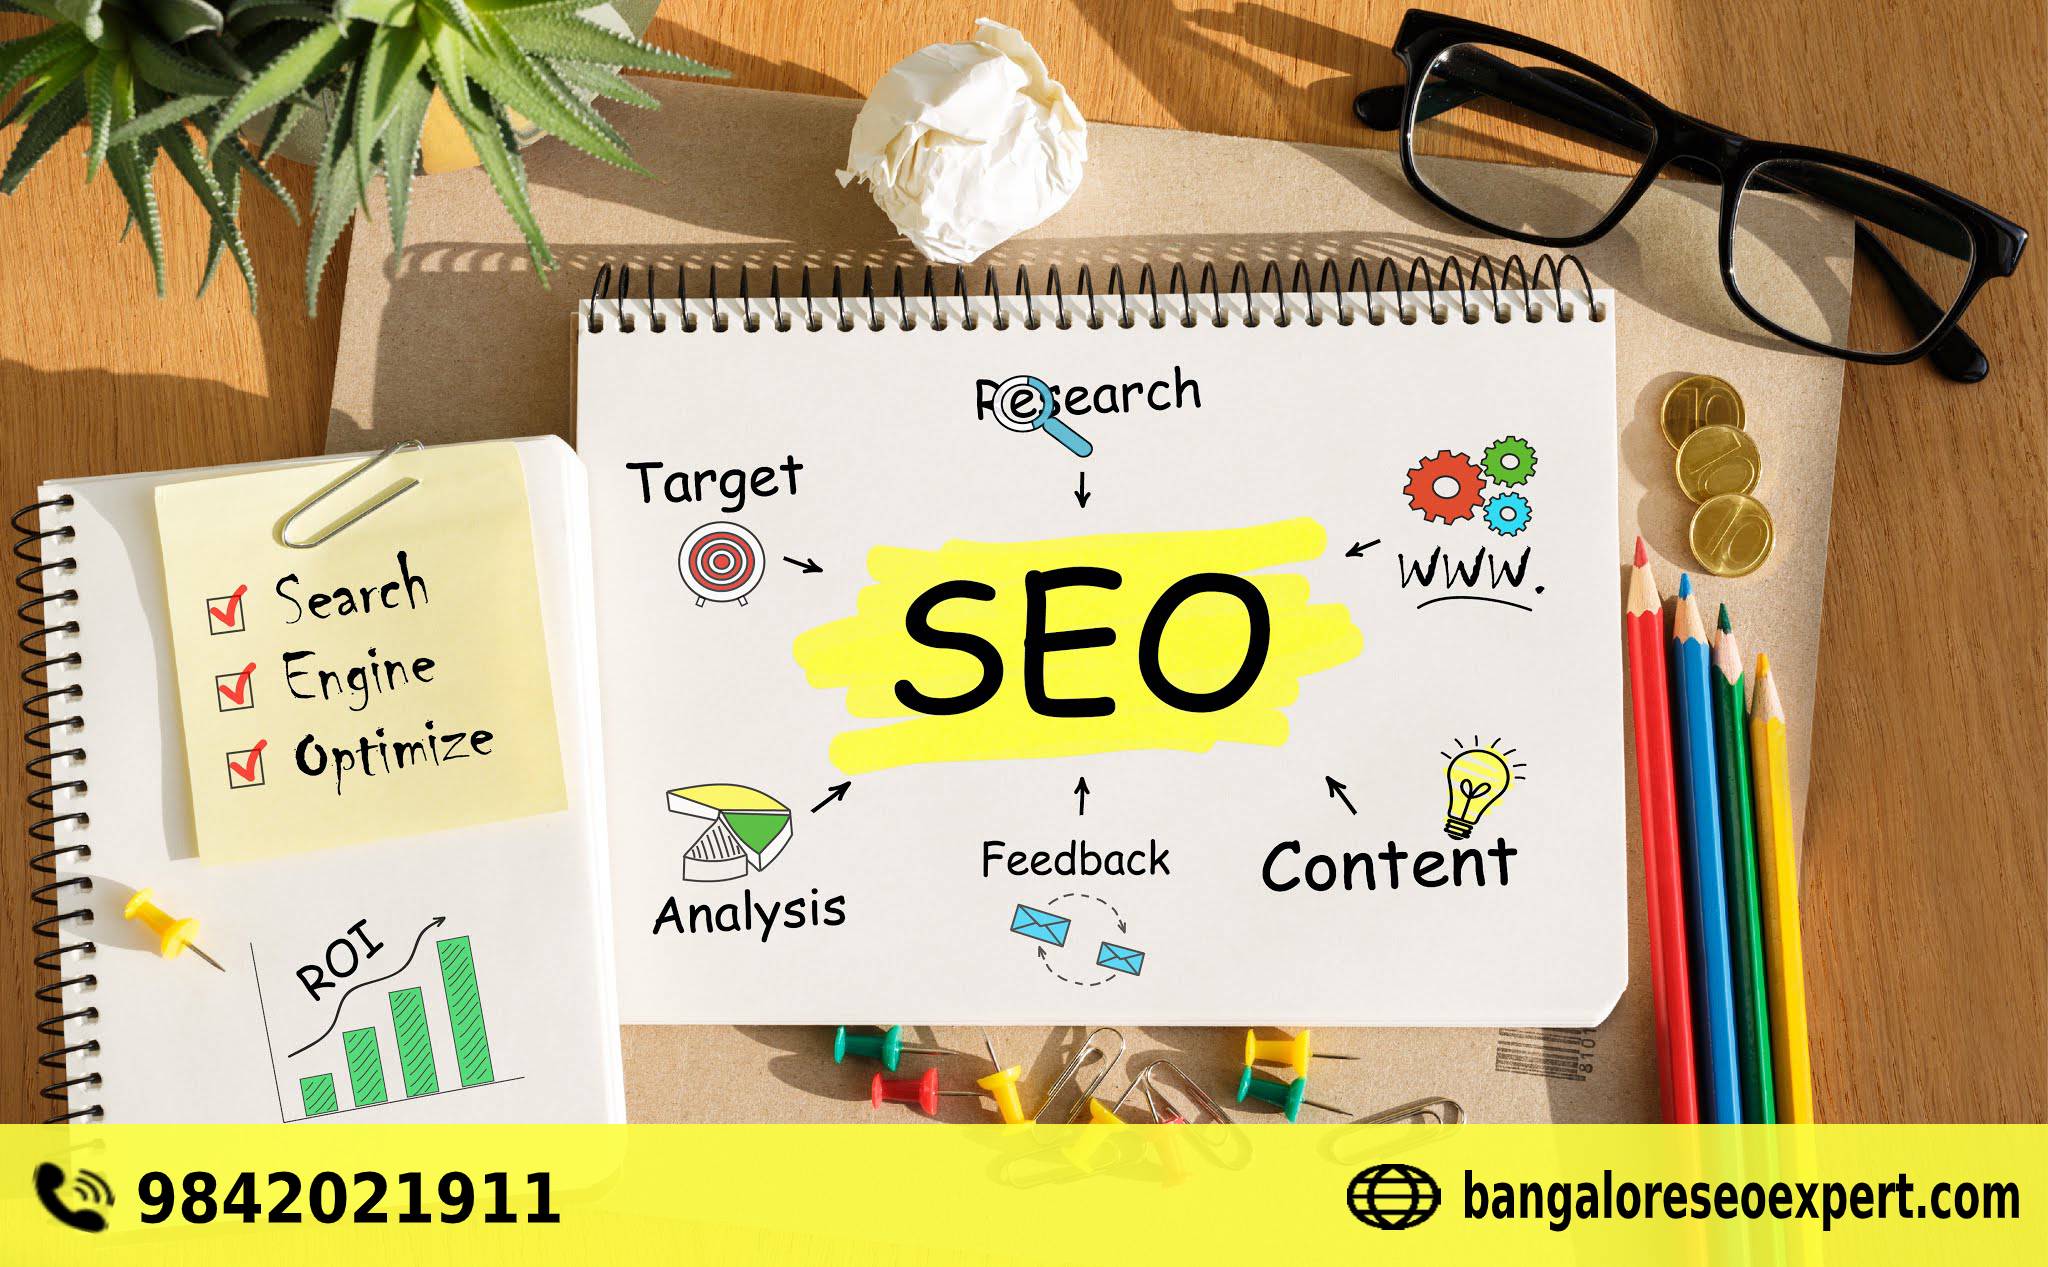 SEO Expert in Bangalore | bangaloreseoexpert.comServicesBusiness OffersAll Indiaother